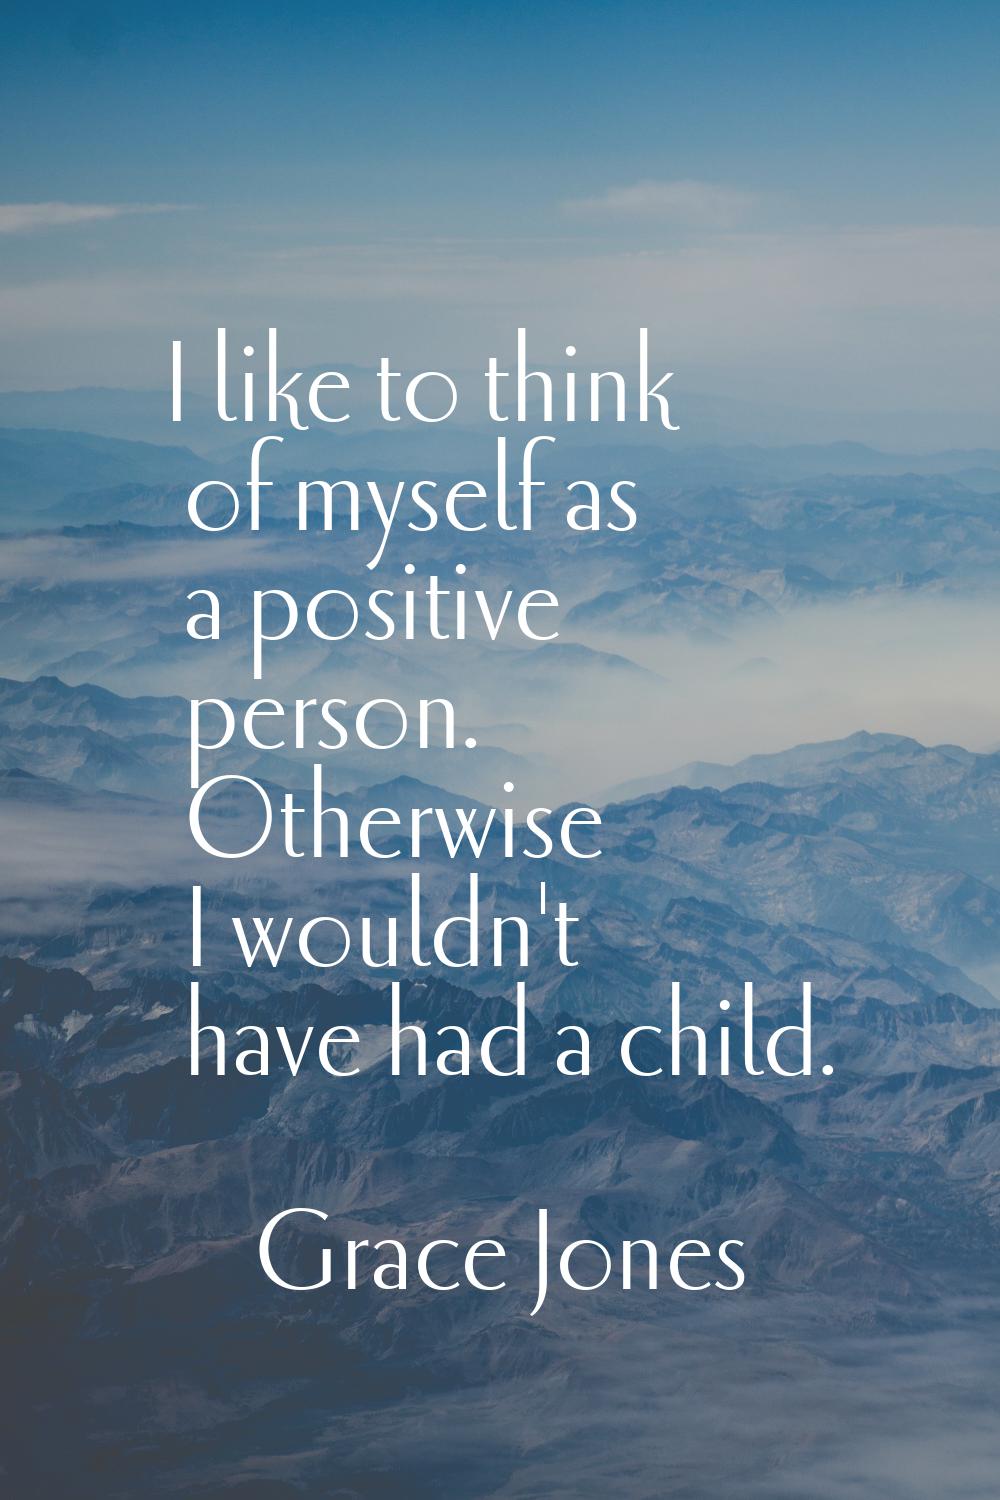 I like to think of myself as a positive person. Otherwise I wouldn't have had a child.